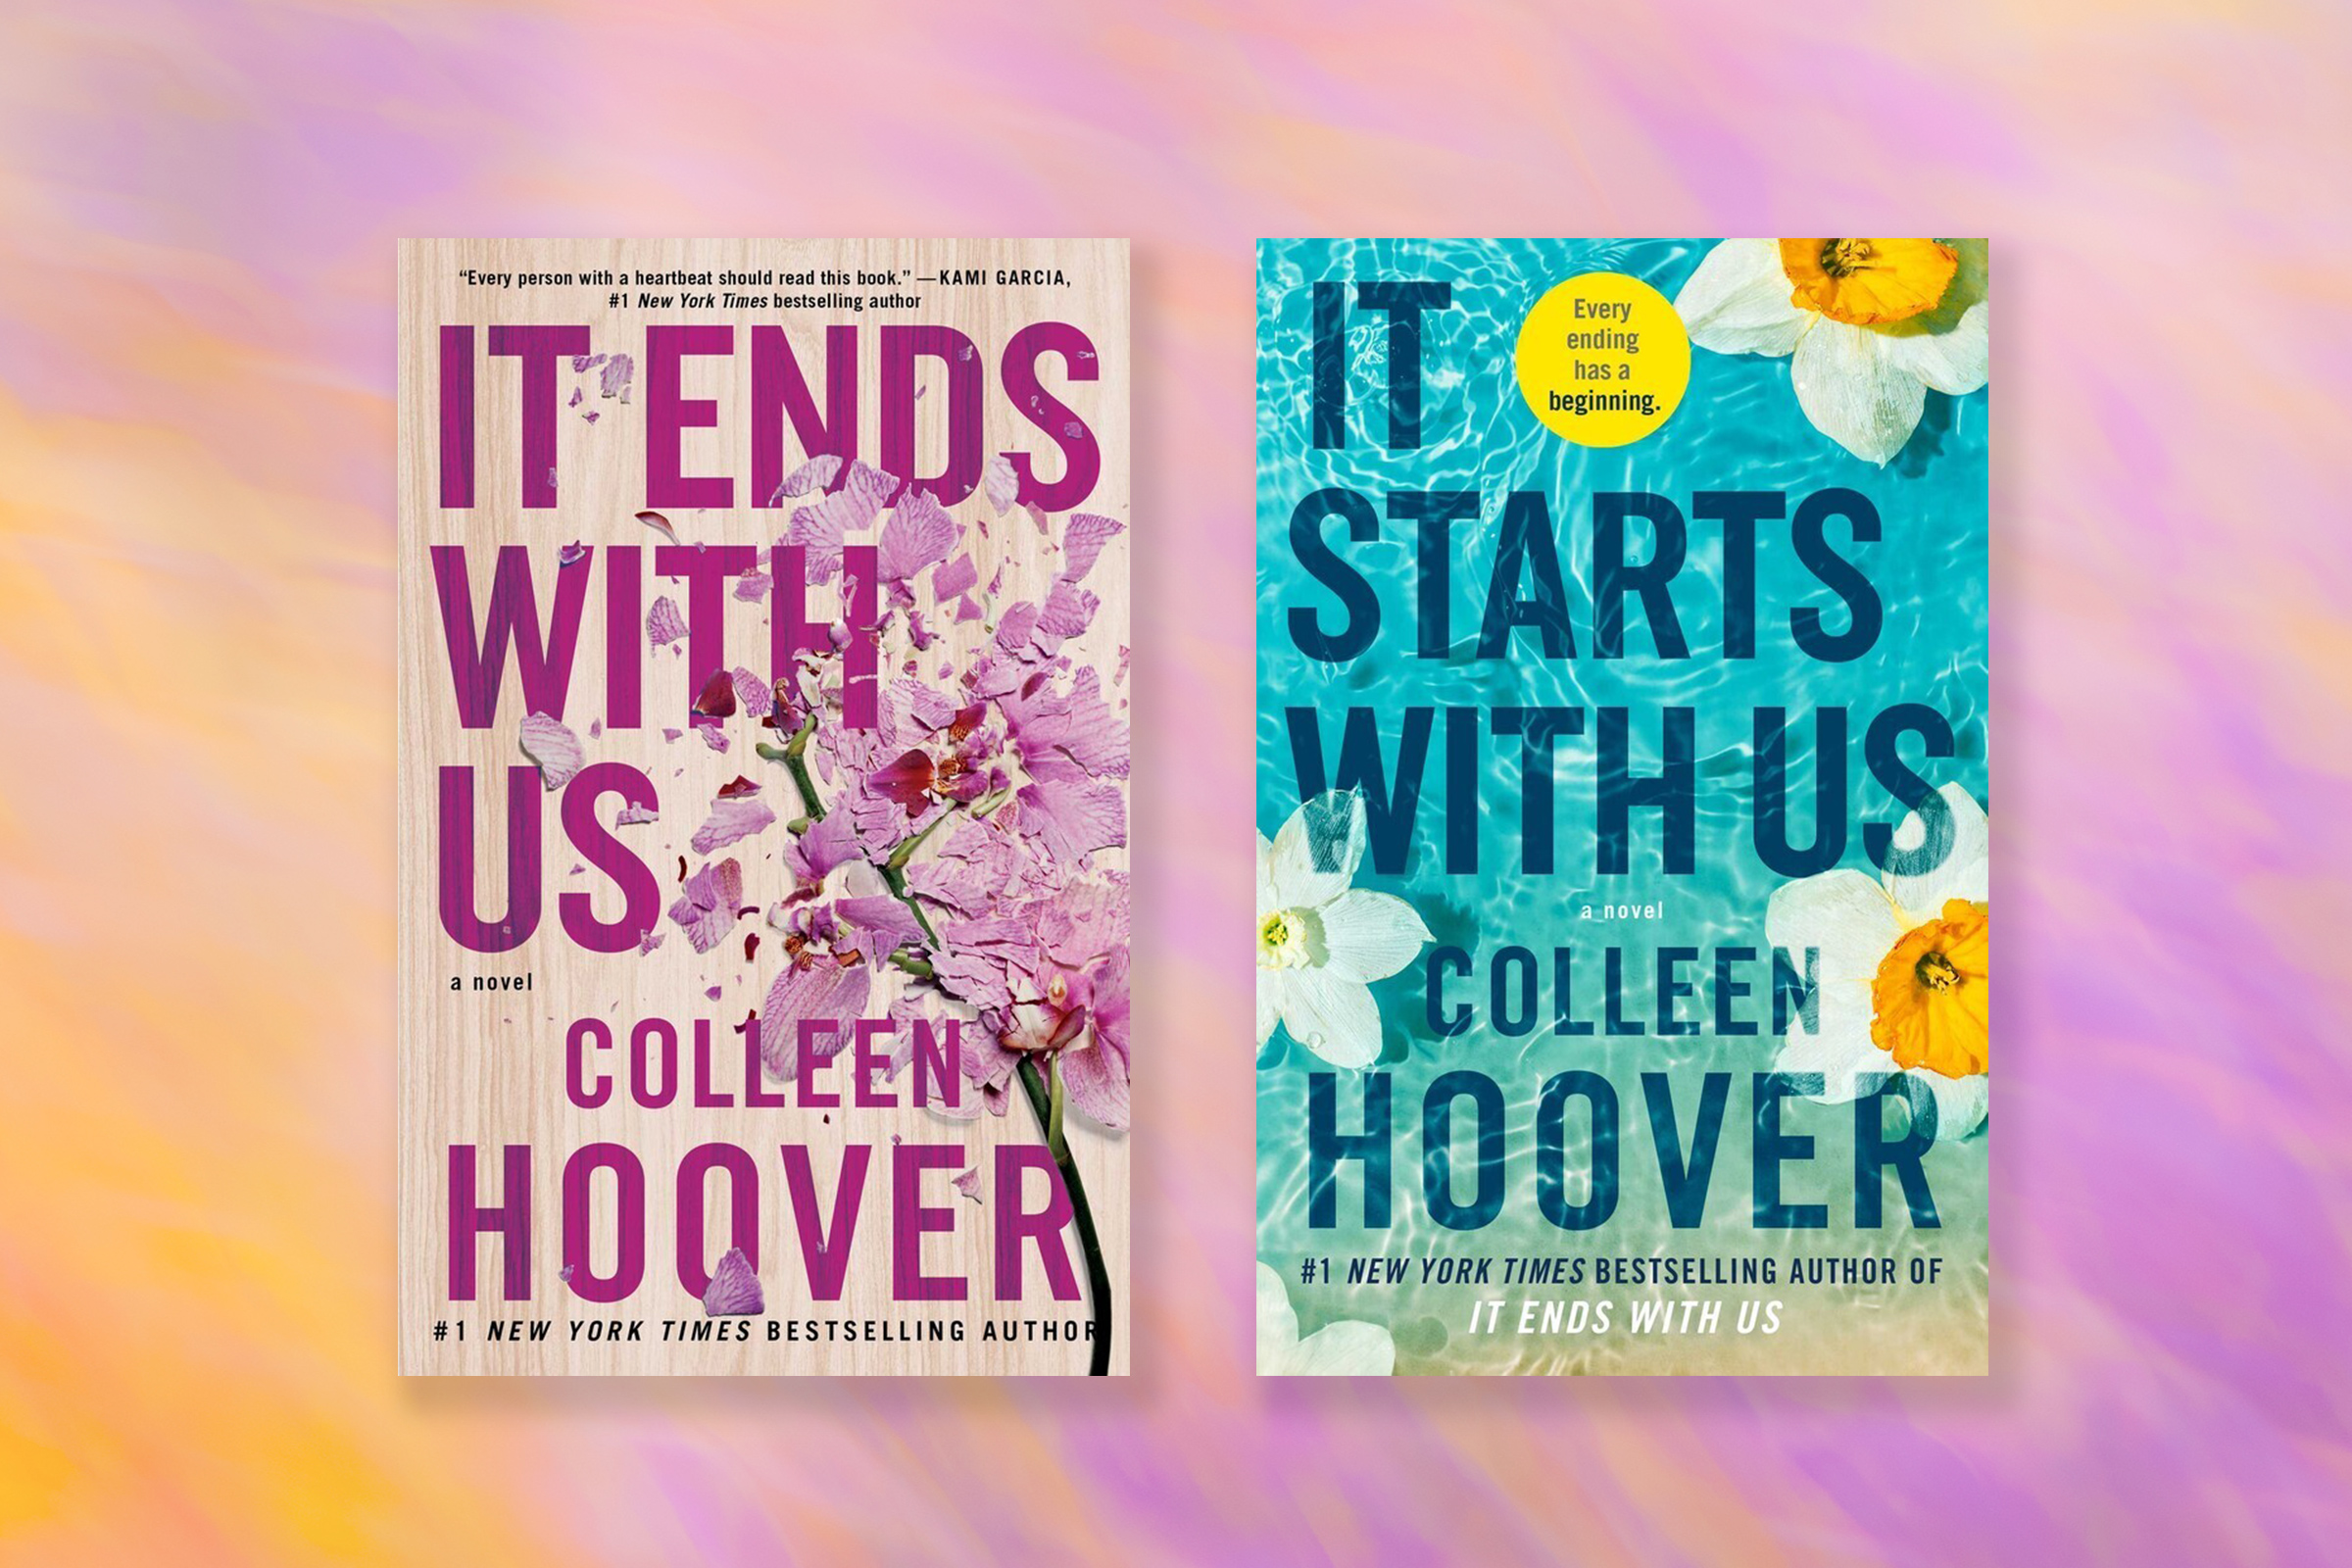 Why Read Colleen Hoover? – the Square